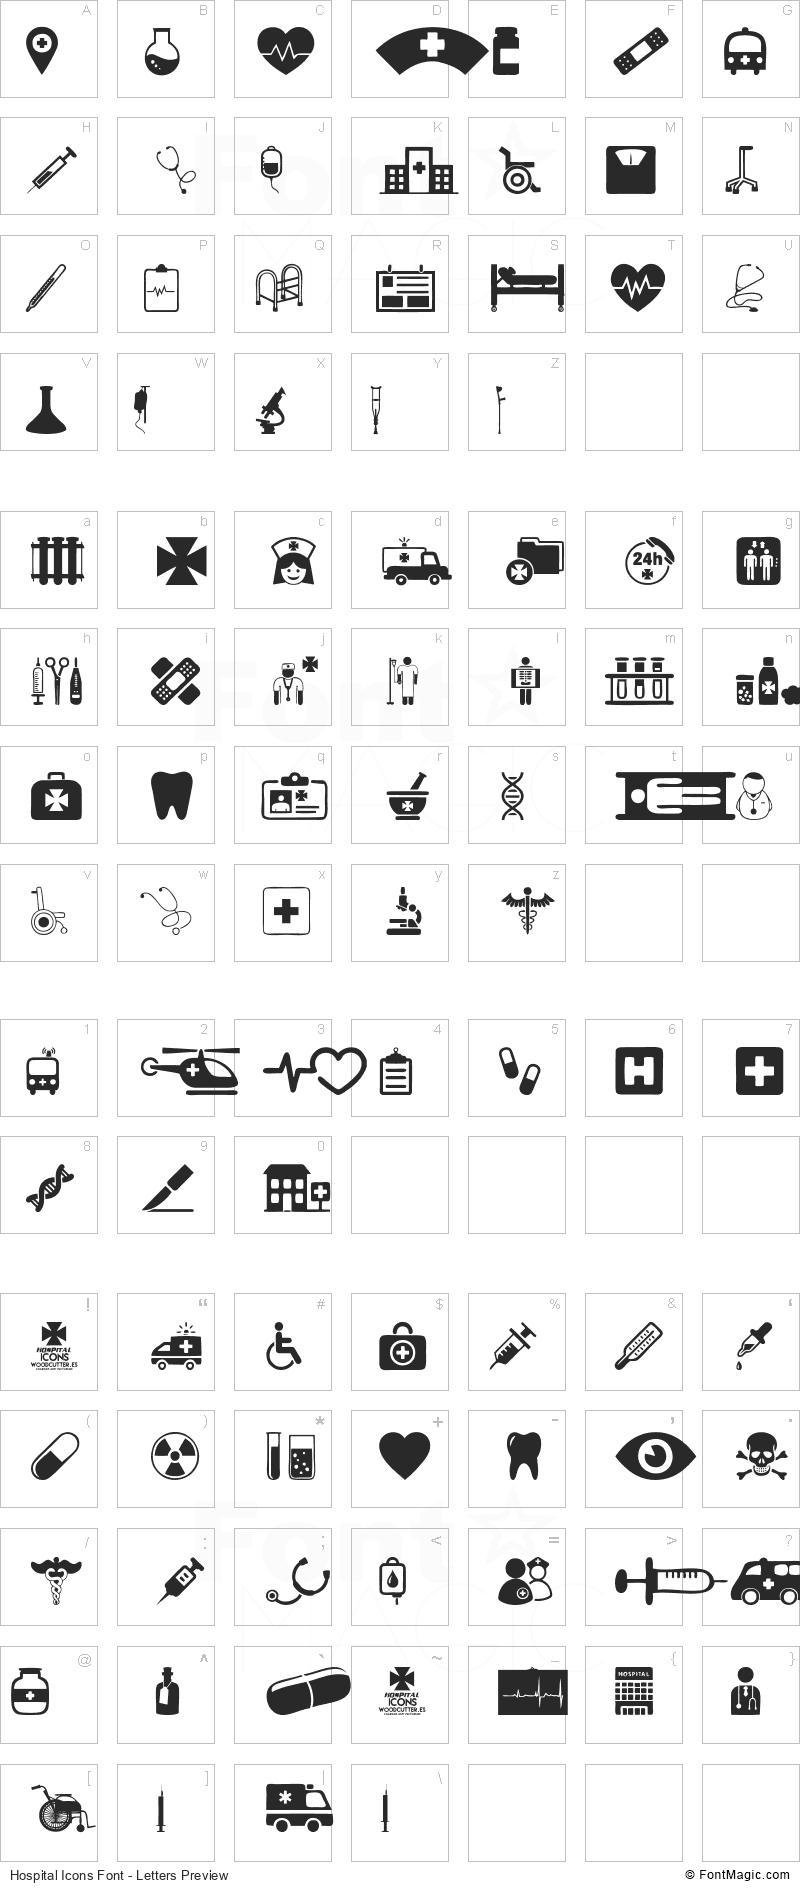 Hospital Icons Font - All Latters Preview Chart